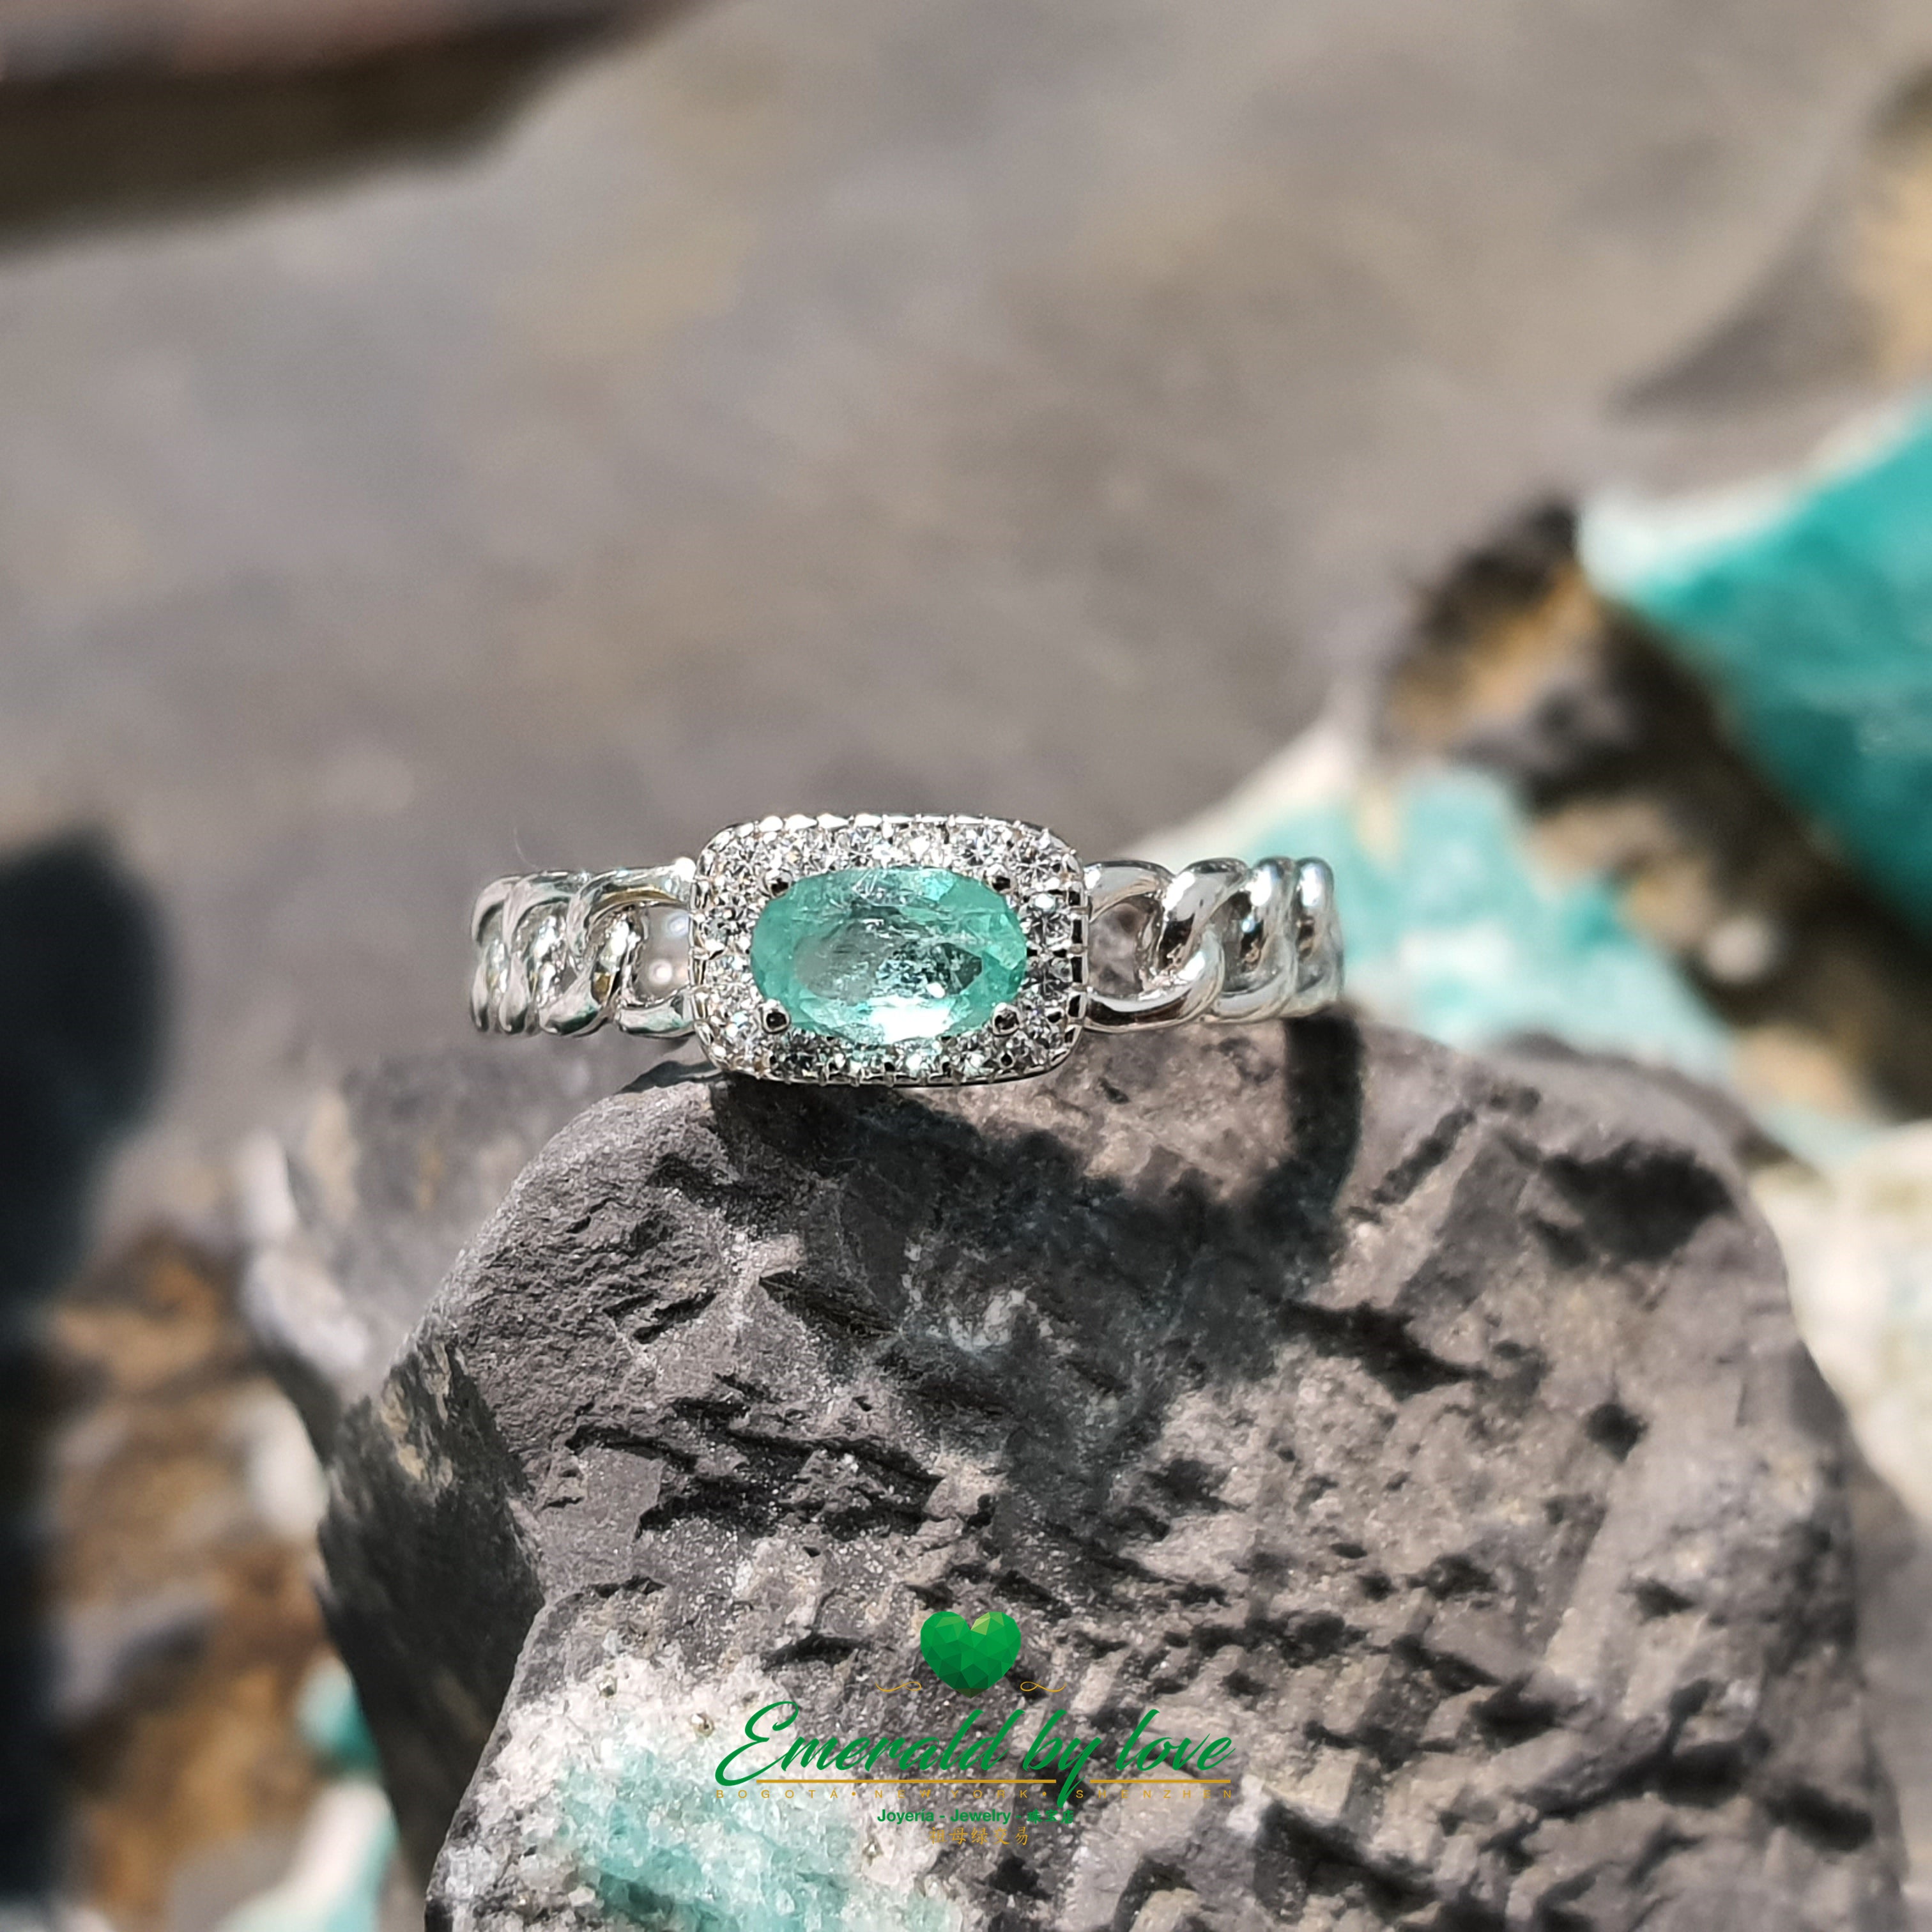 Silver Chain Band Ring with Oval Crystal Emerald Centerpiece: Contemporary Sophistication